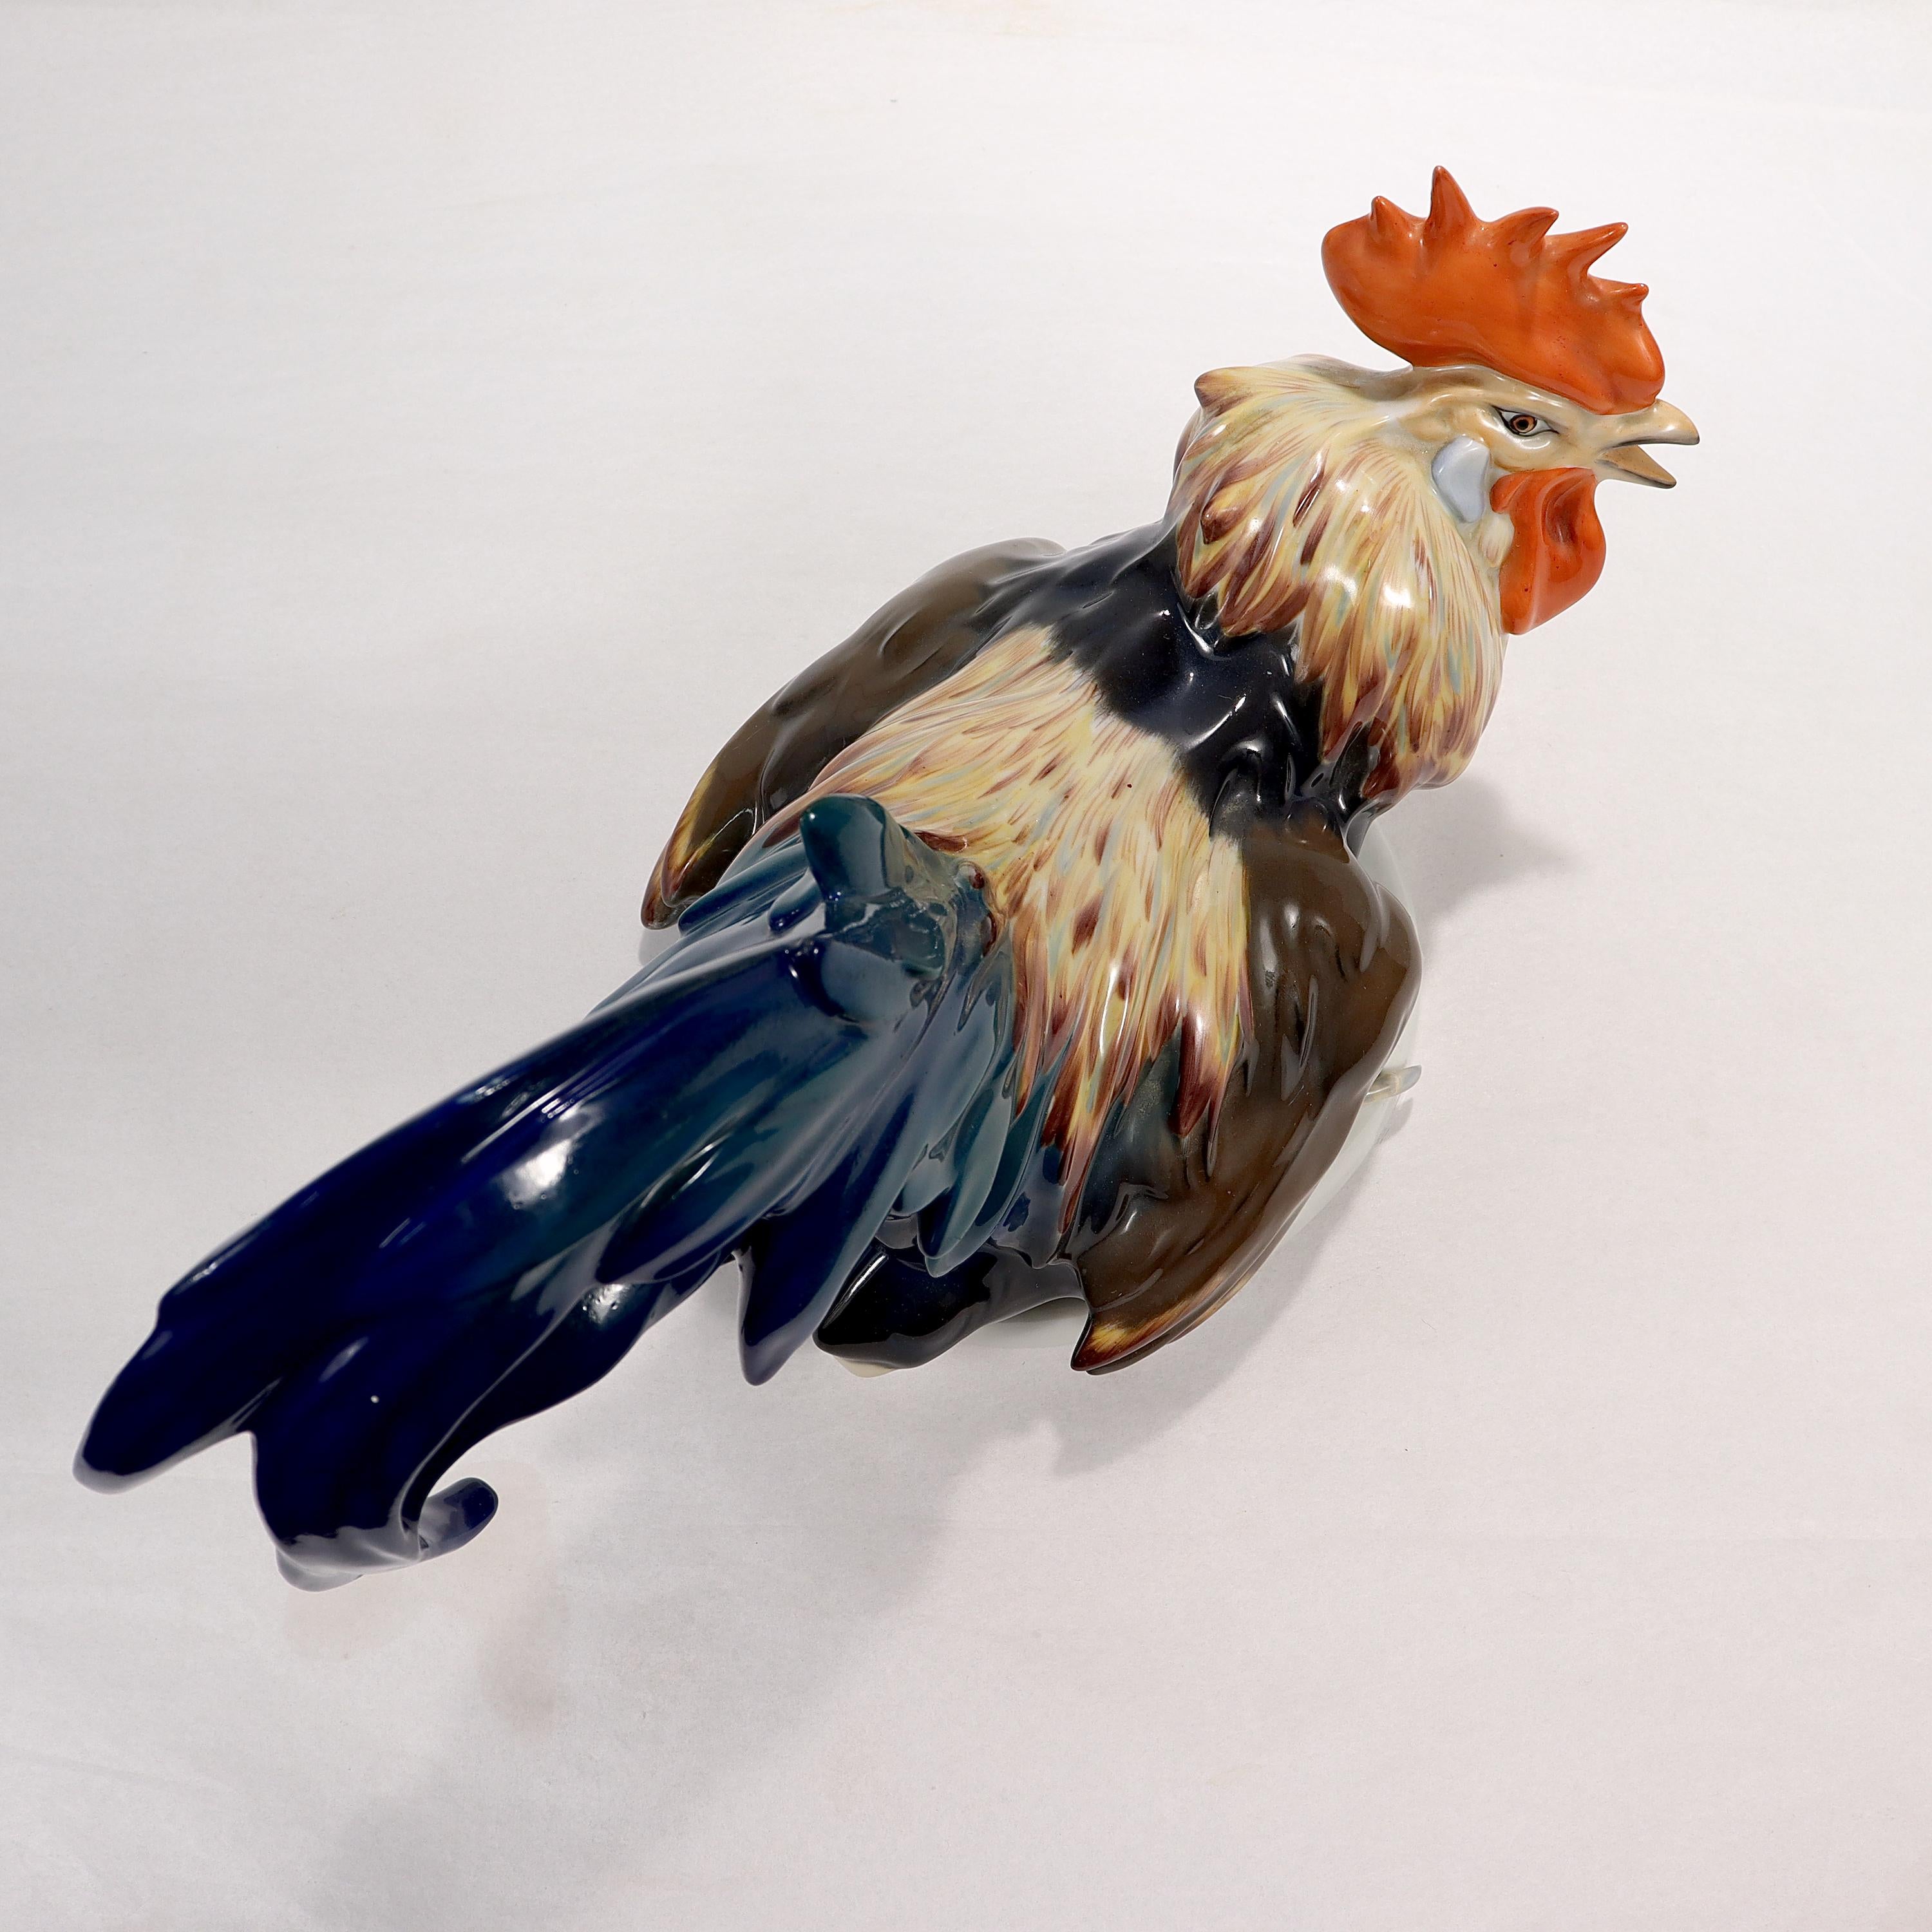 Large Mid-Century Rosenthal Porcelain Figurine of a Rooster by J. Feldtmann For Sale 3